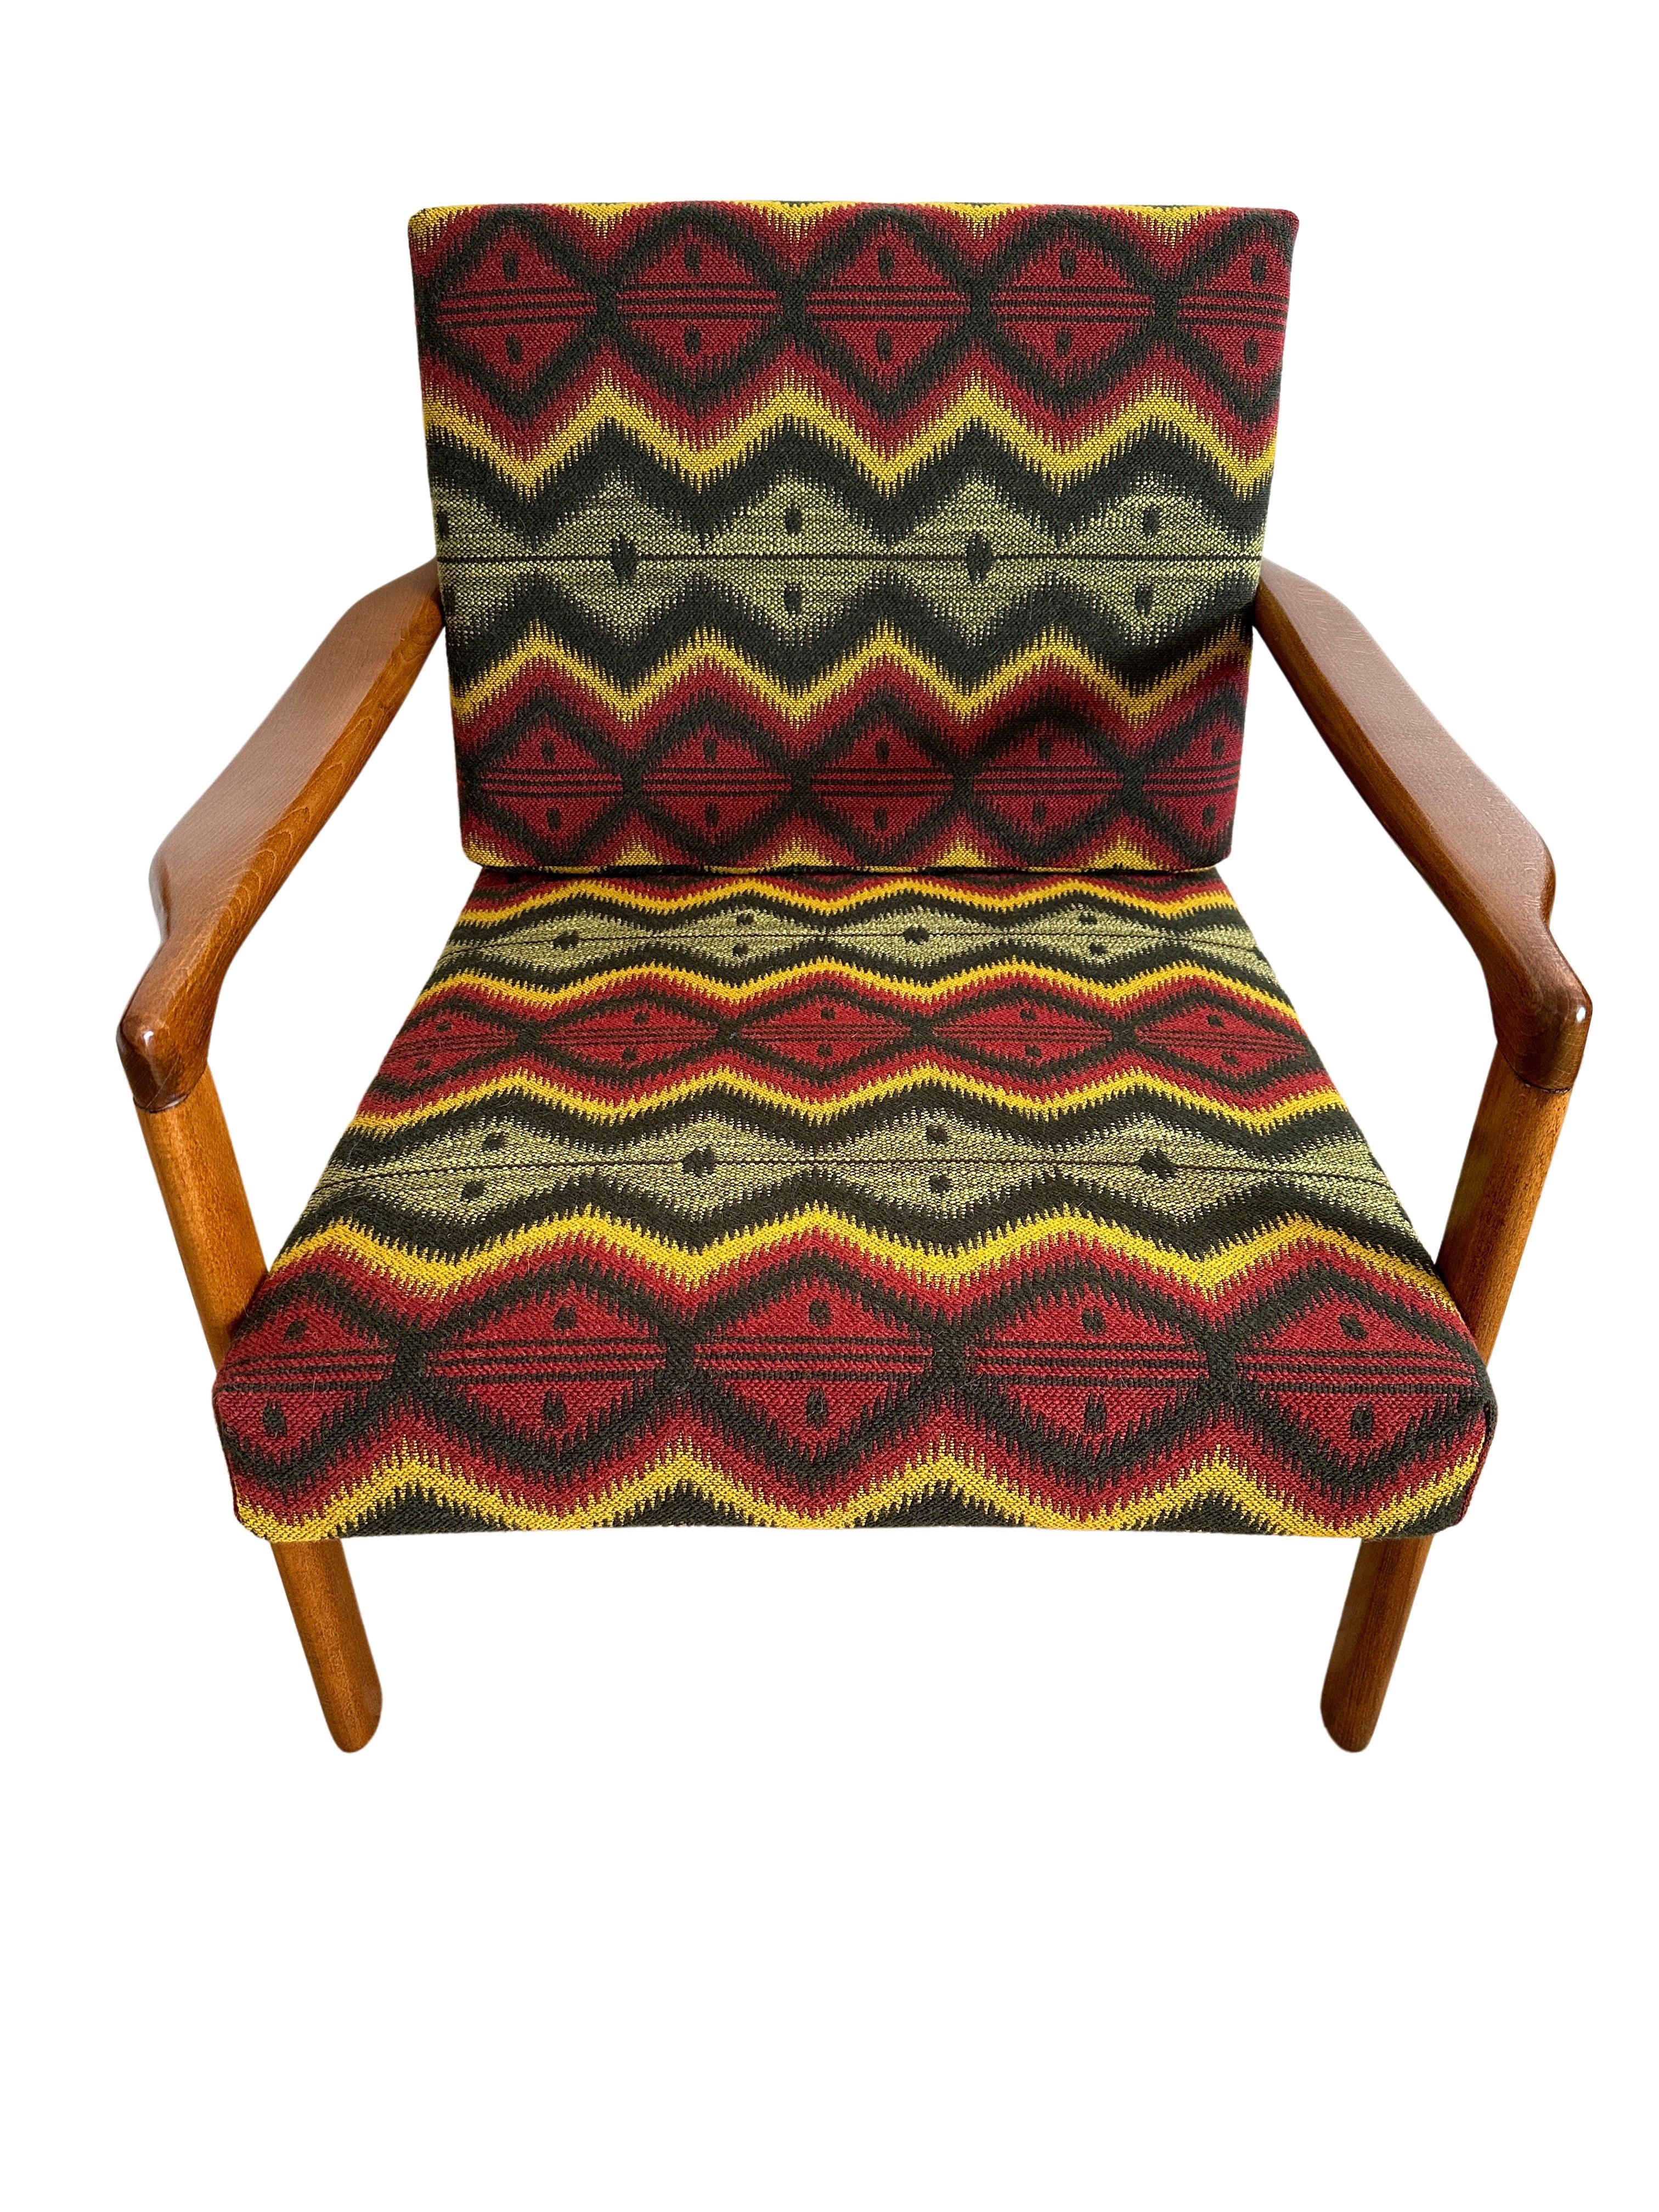 Set of Two Armchairs by Zenon Bączyk, Mind the Gap Upholstery, Europe, 1960s For Sale 4